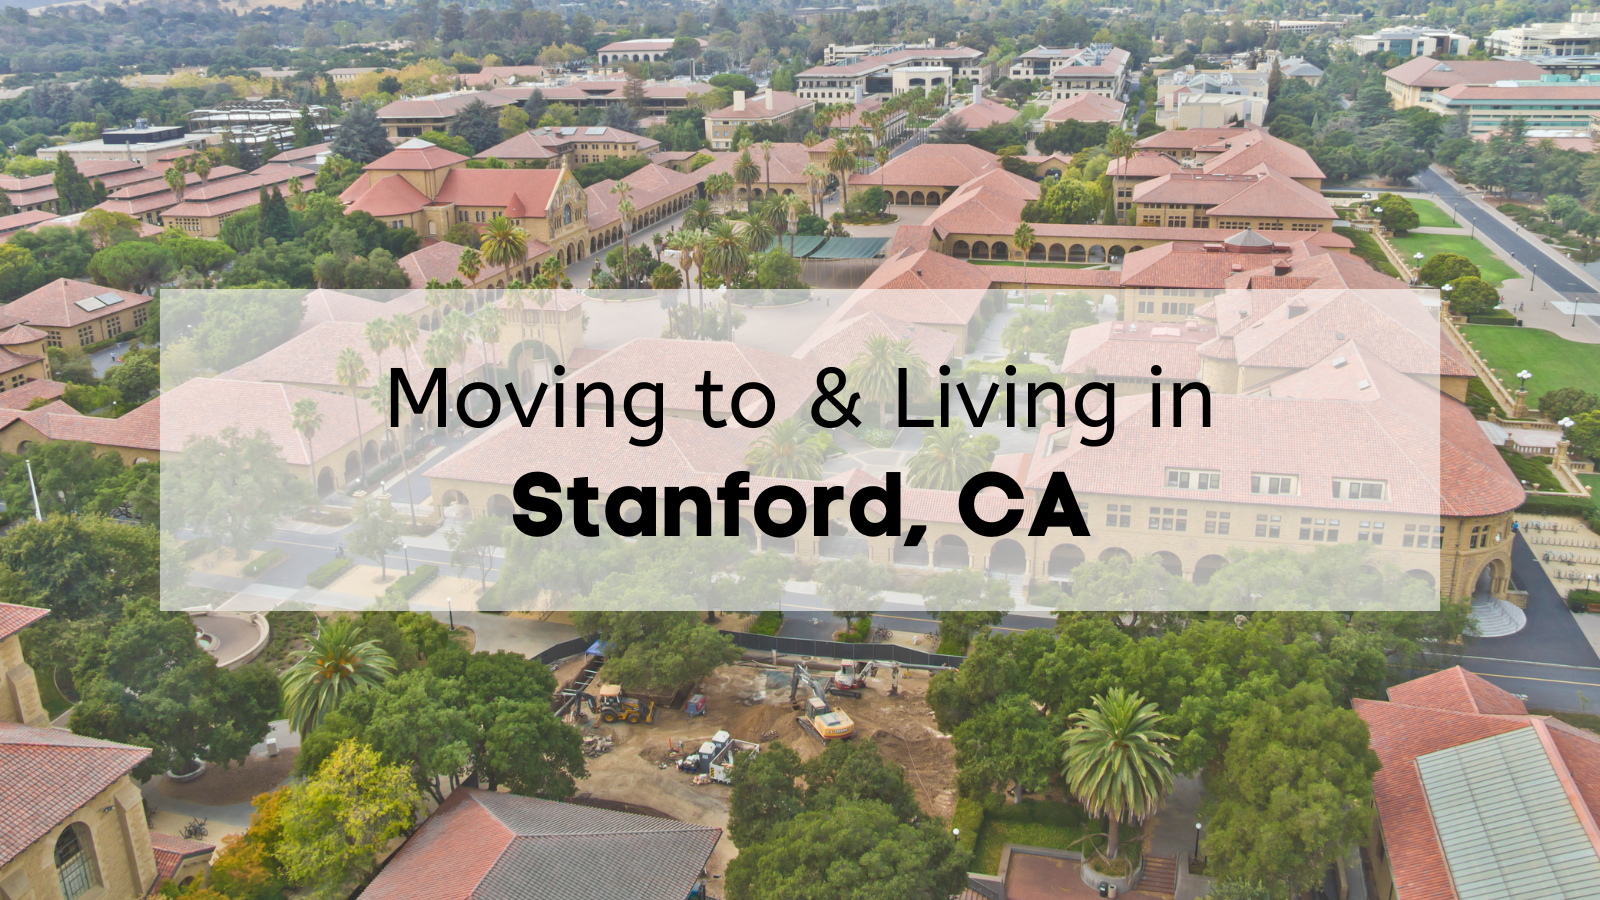 Moving to Stanford